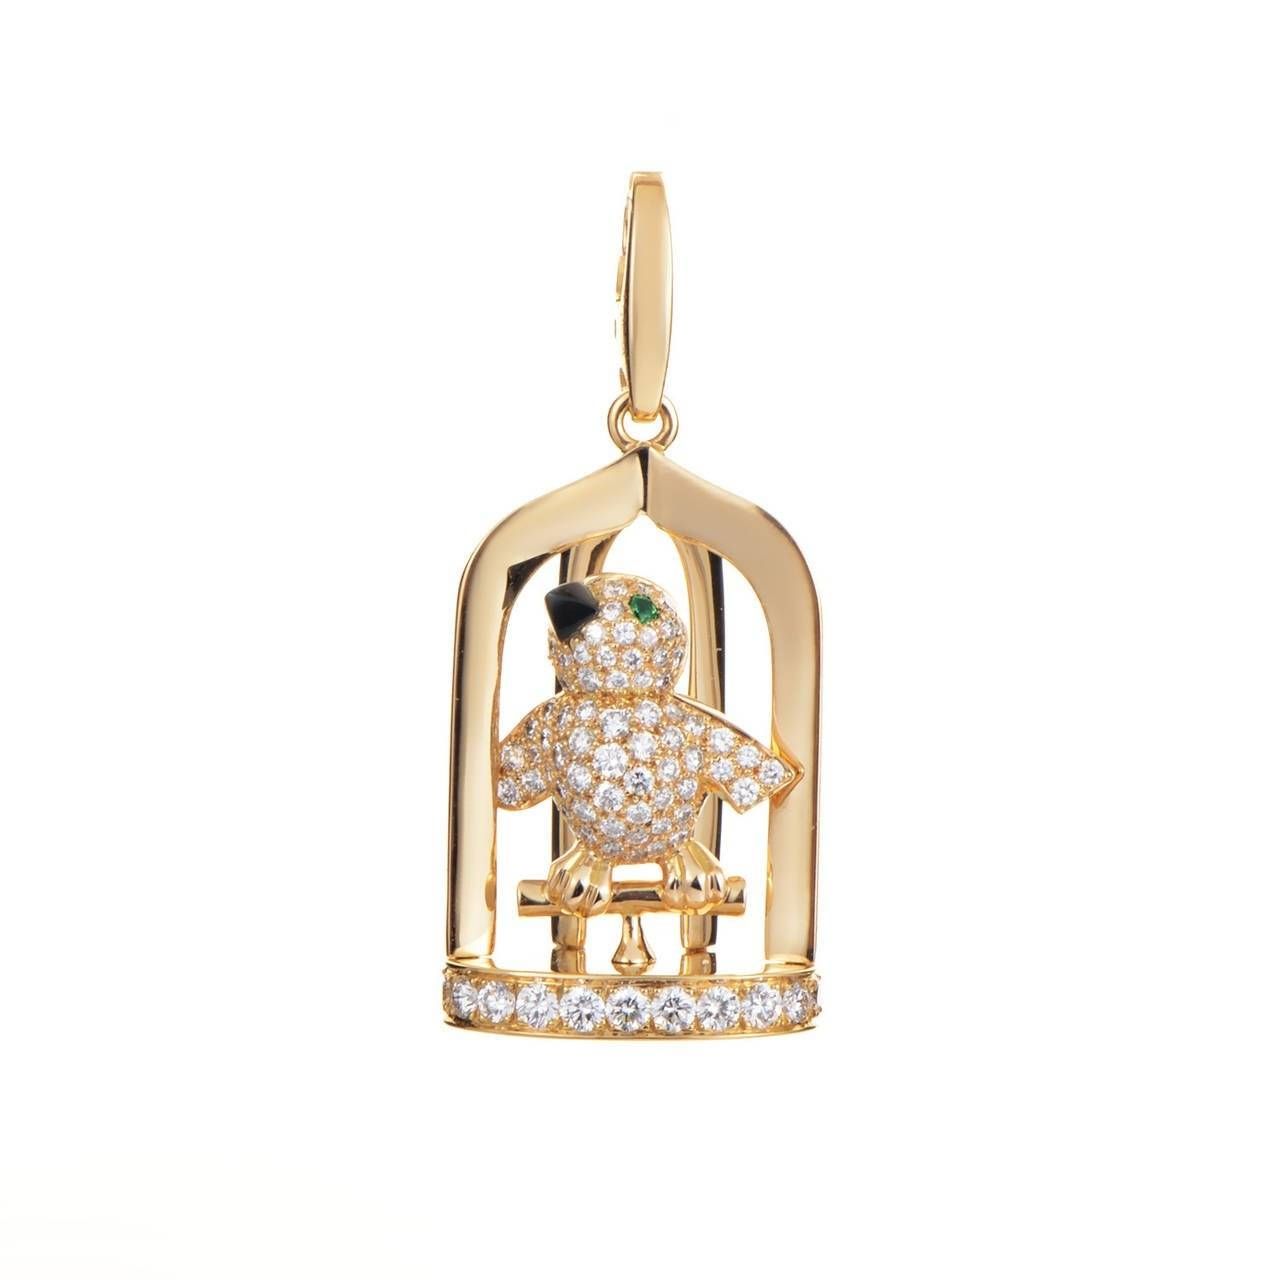 Cartier Precious Gemstone Gold Birdcage Pendant For Sale At 1stdibs Intended For Birdcage Pendants (Photo 6 of 15)